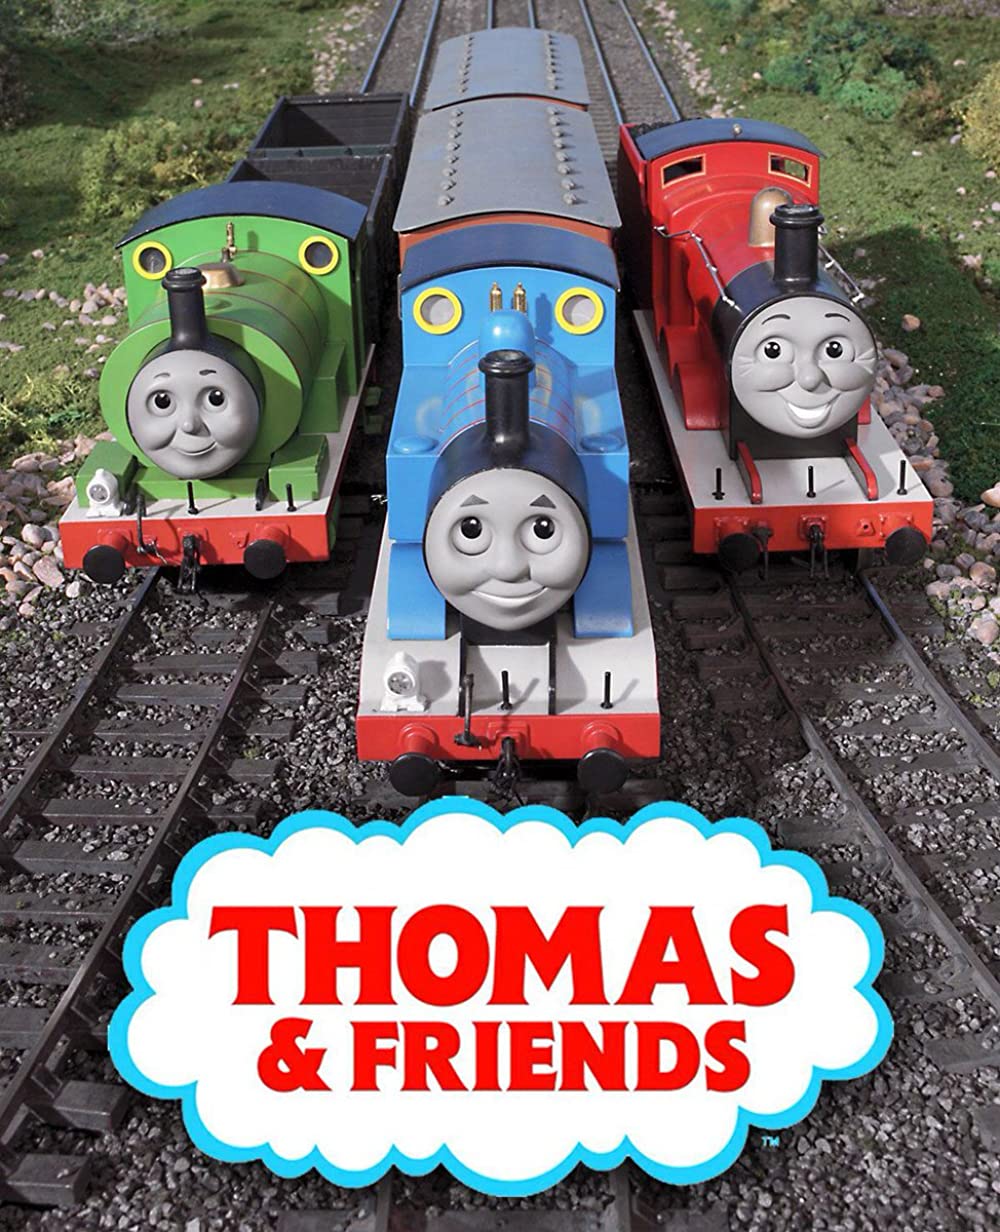 IMG : Thomas The Tank Engine and Friends